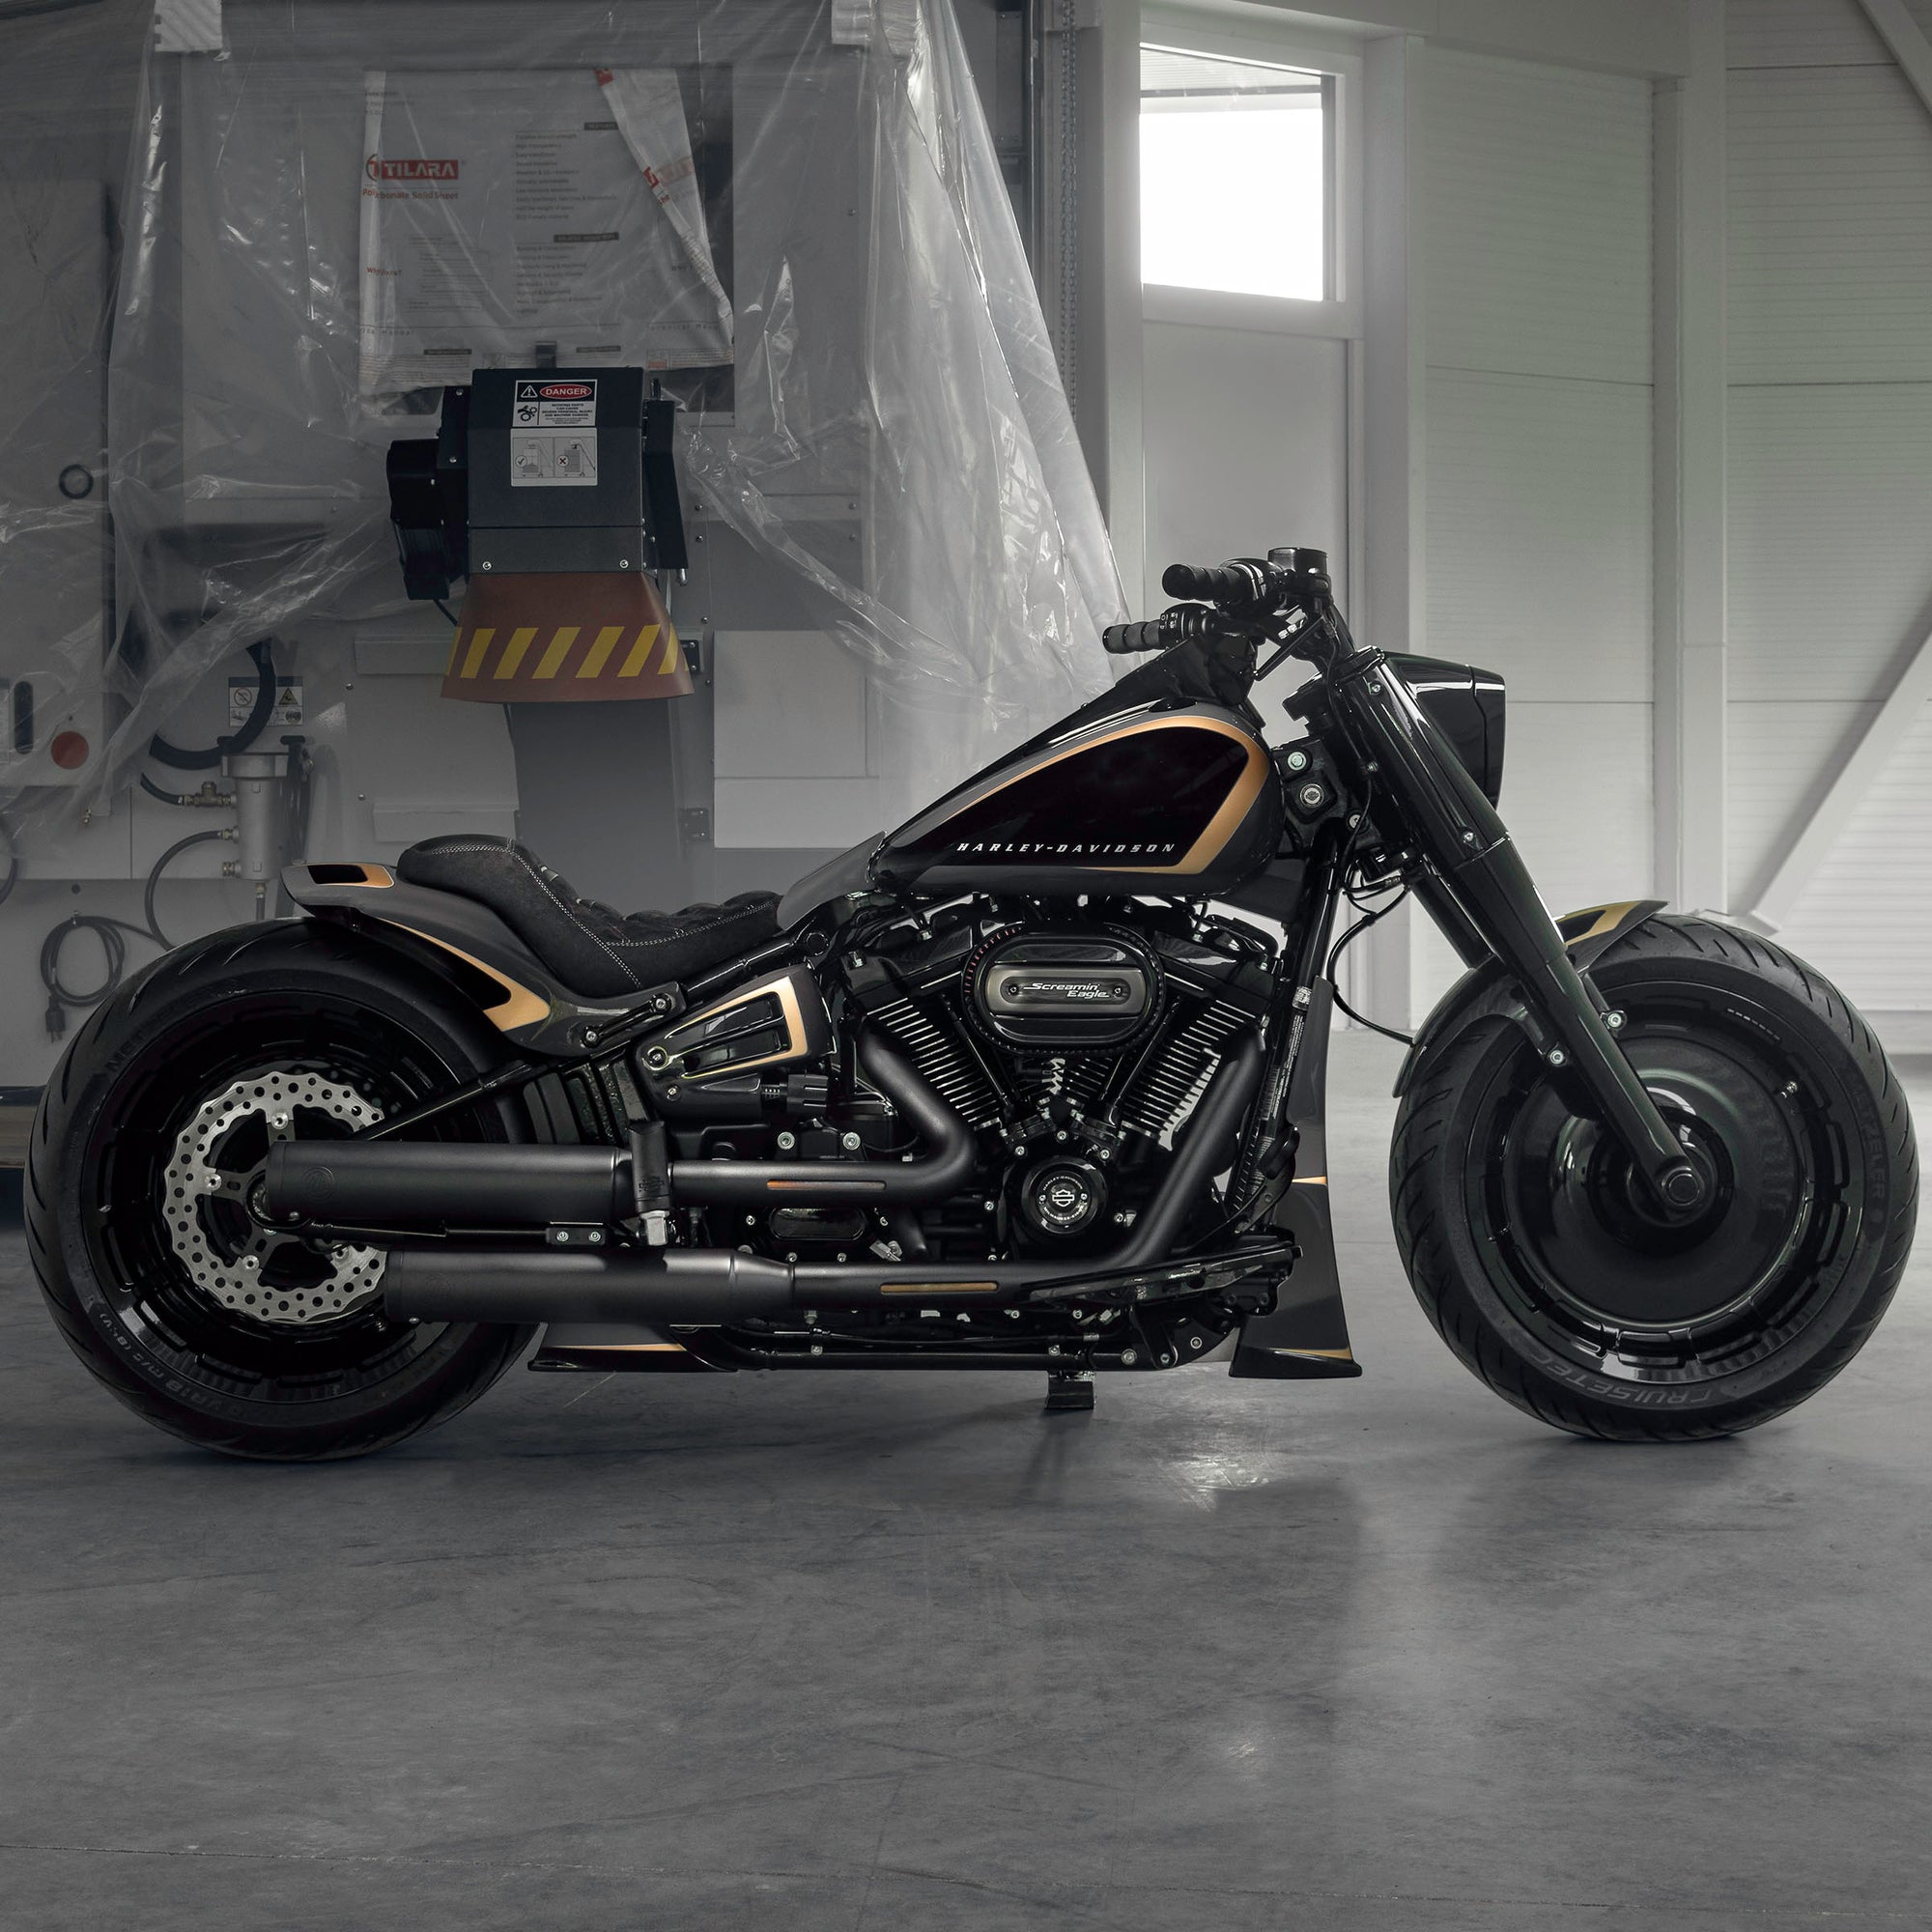 Harley Davidson motorcycle with Killer Custom parts from the side in a modern garage with some equipment in the background